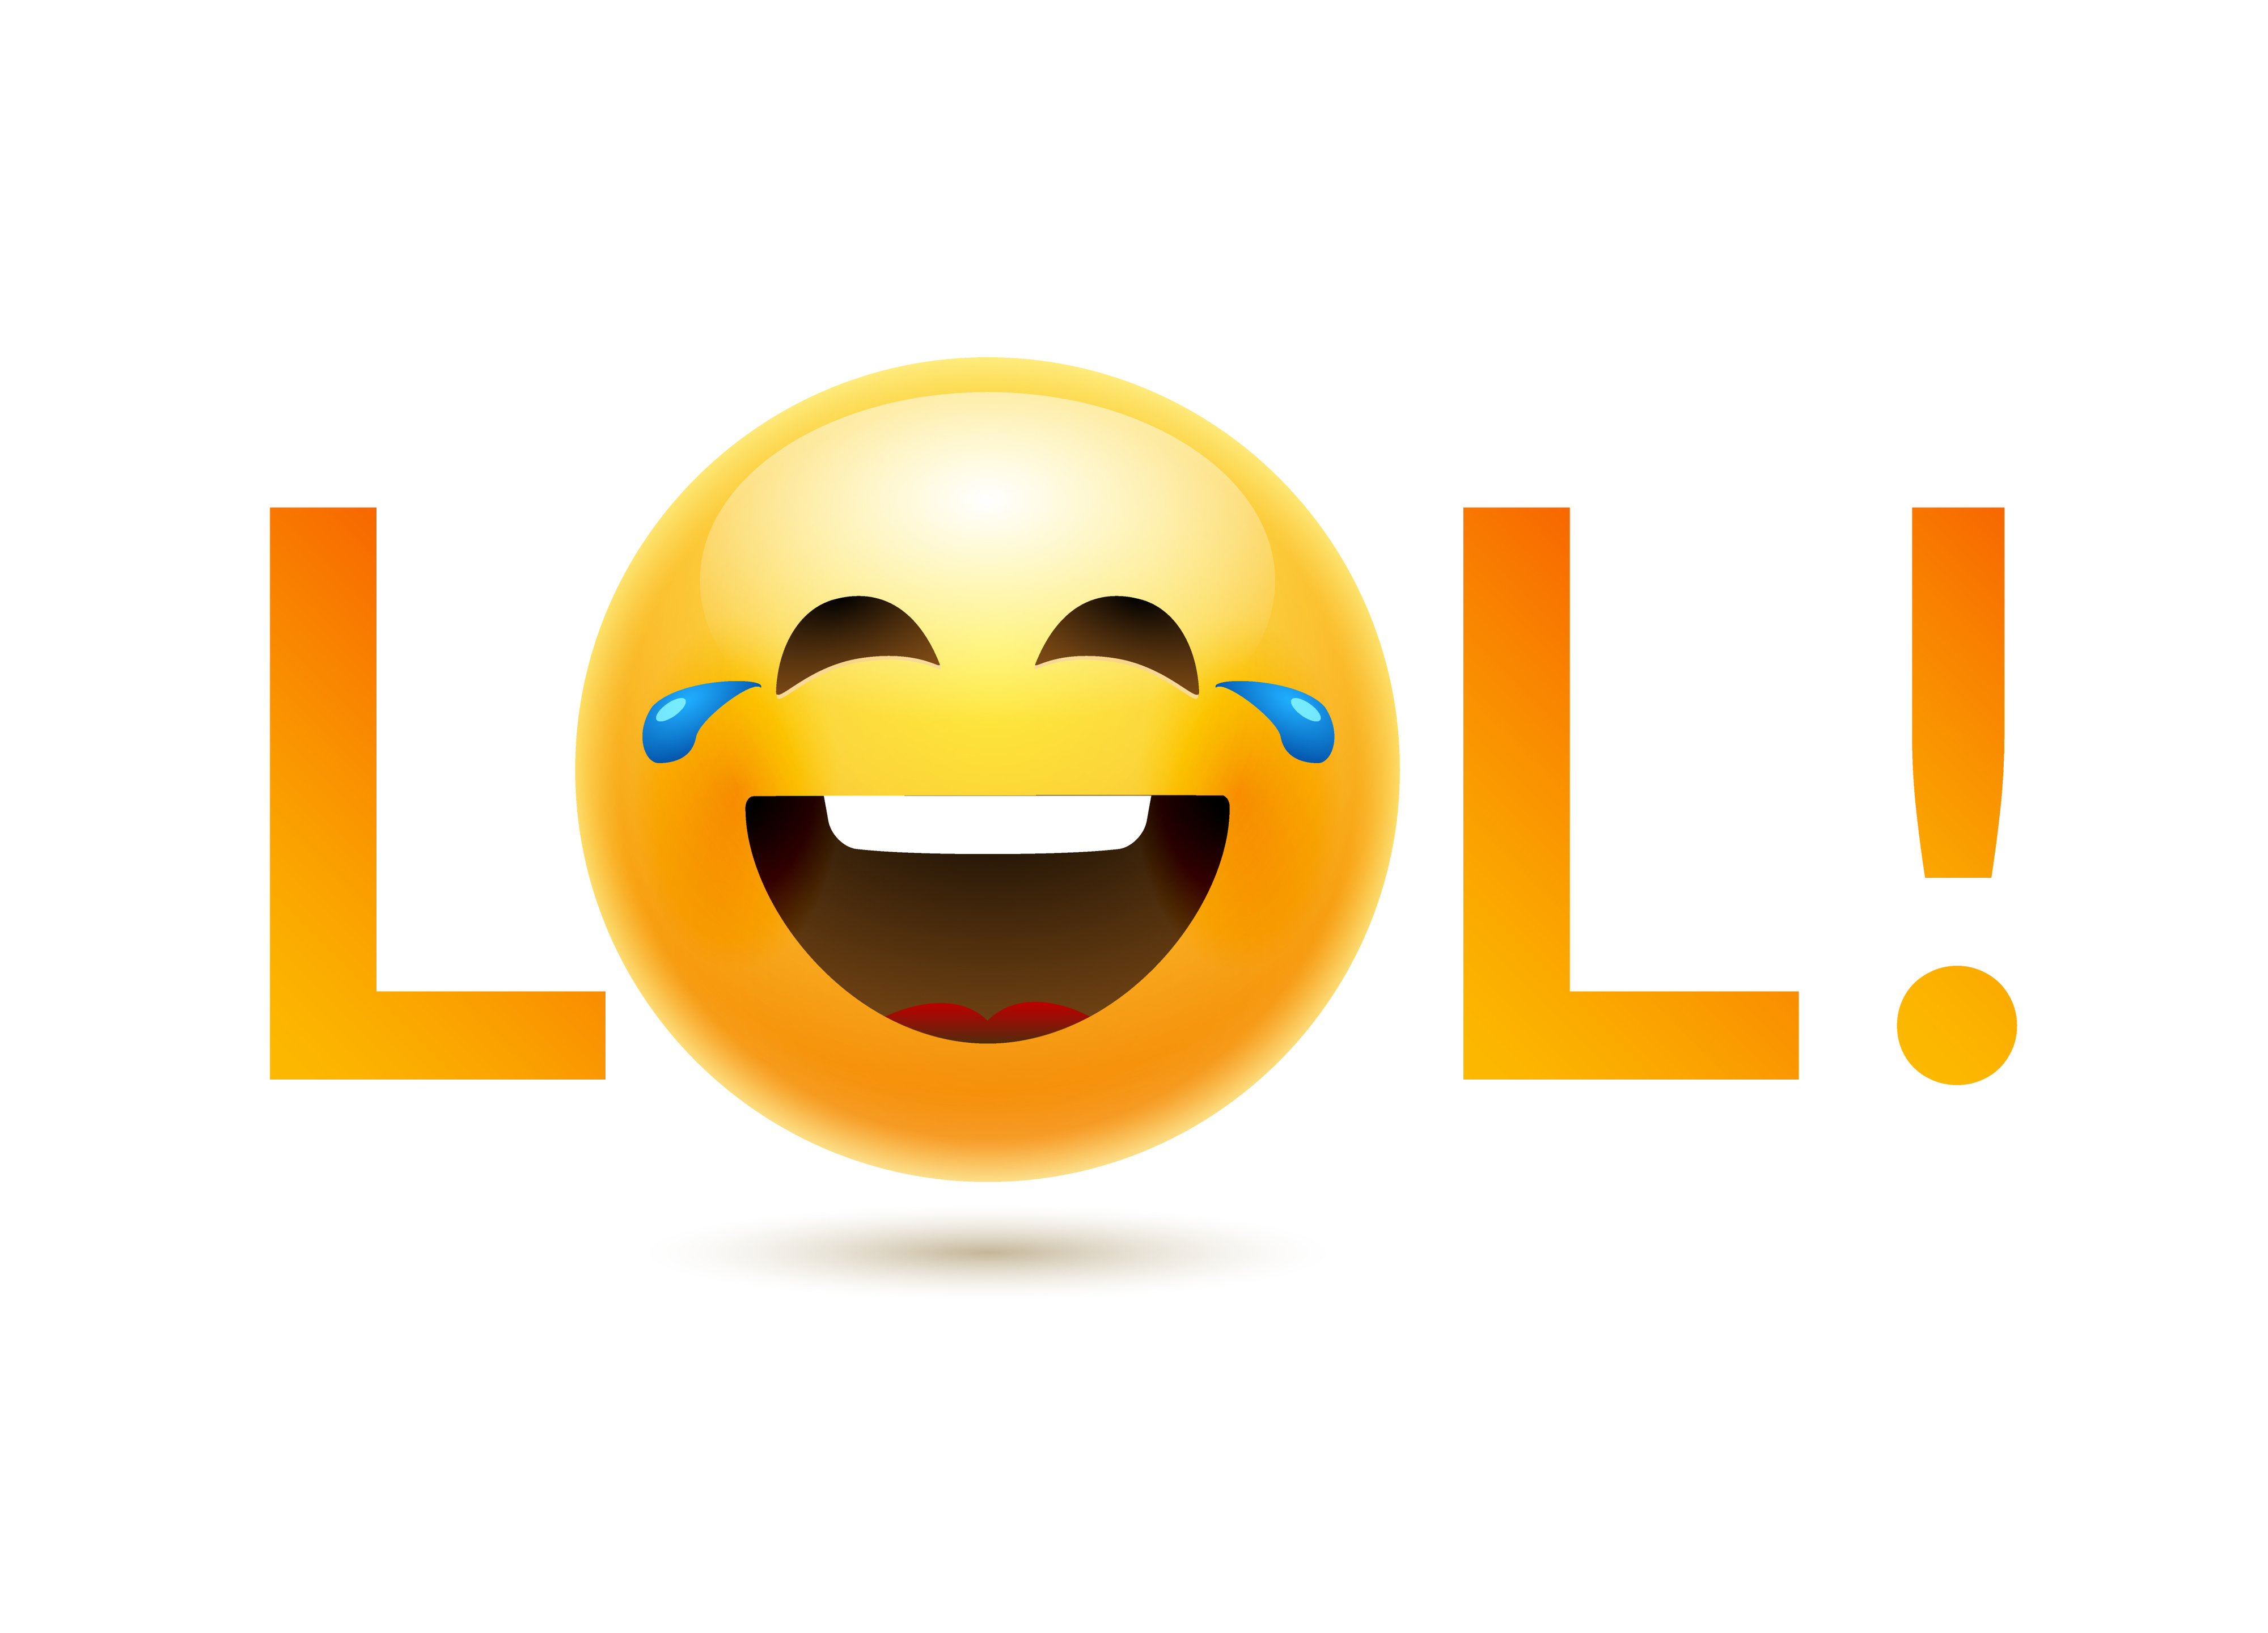 Laughing emoji with tears and the text &quot;LOL!&quot; indicating something funny on the internet